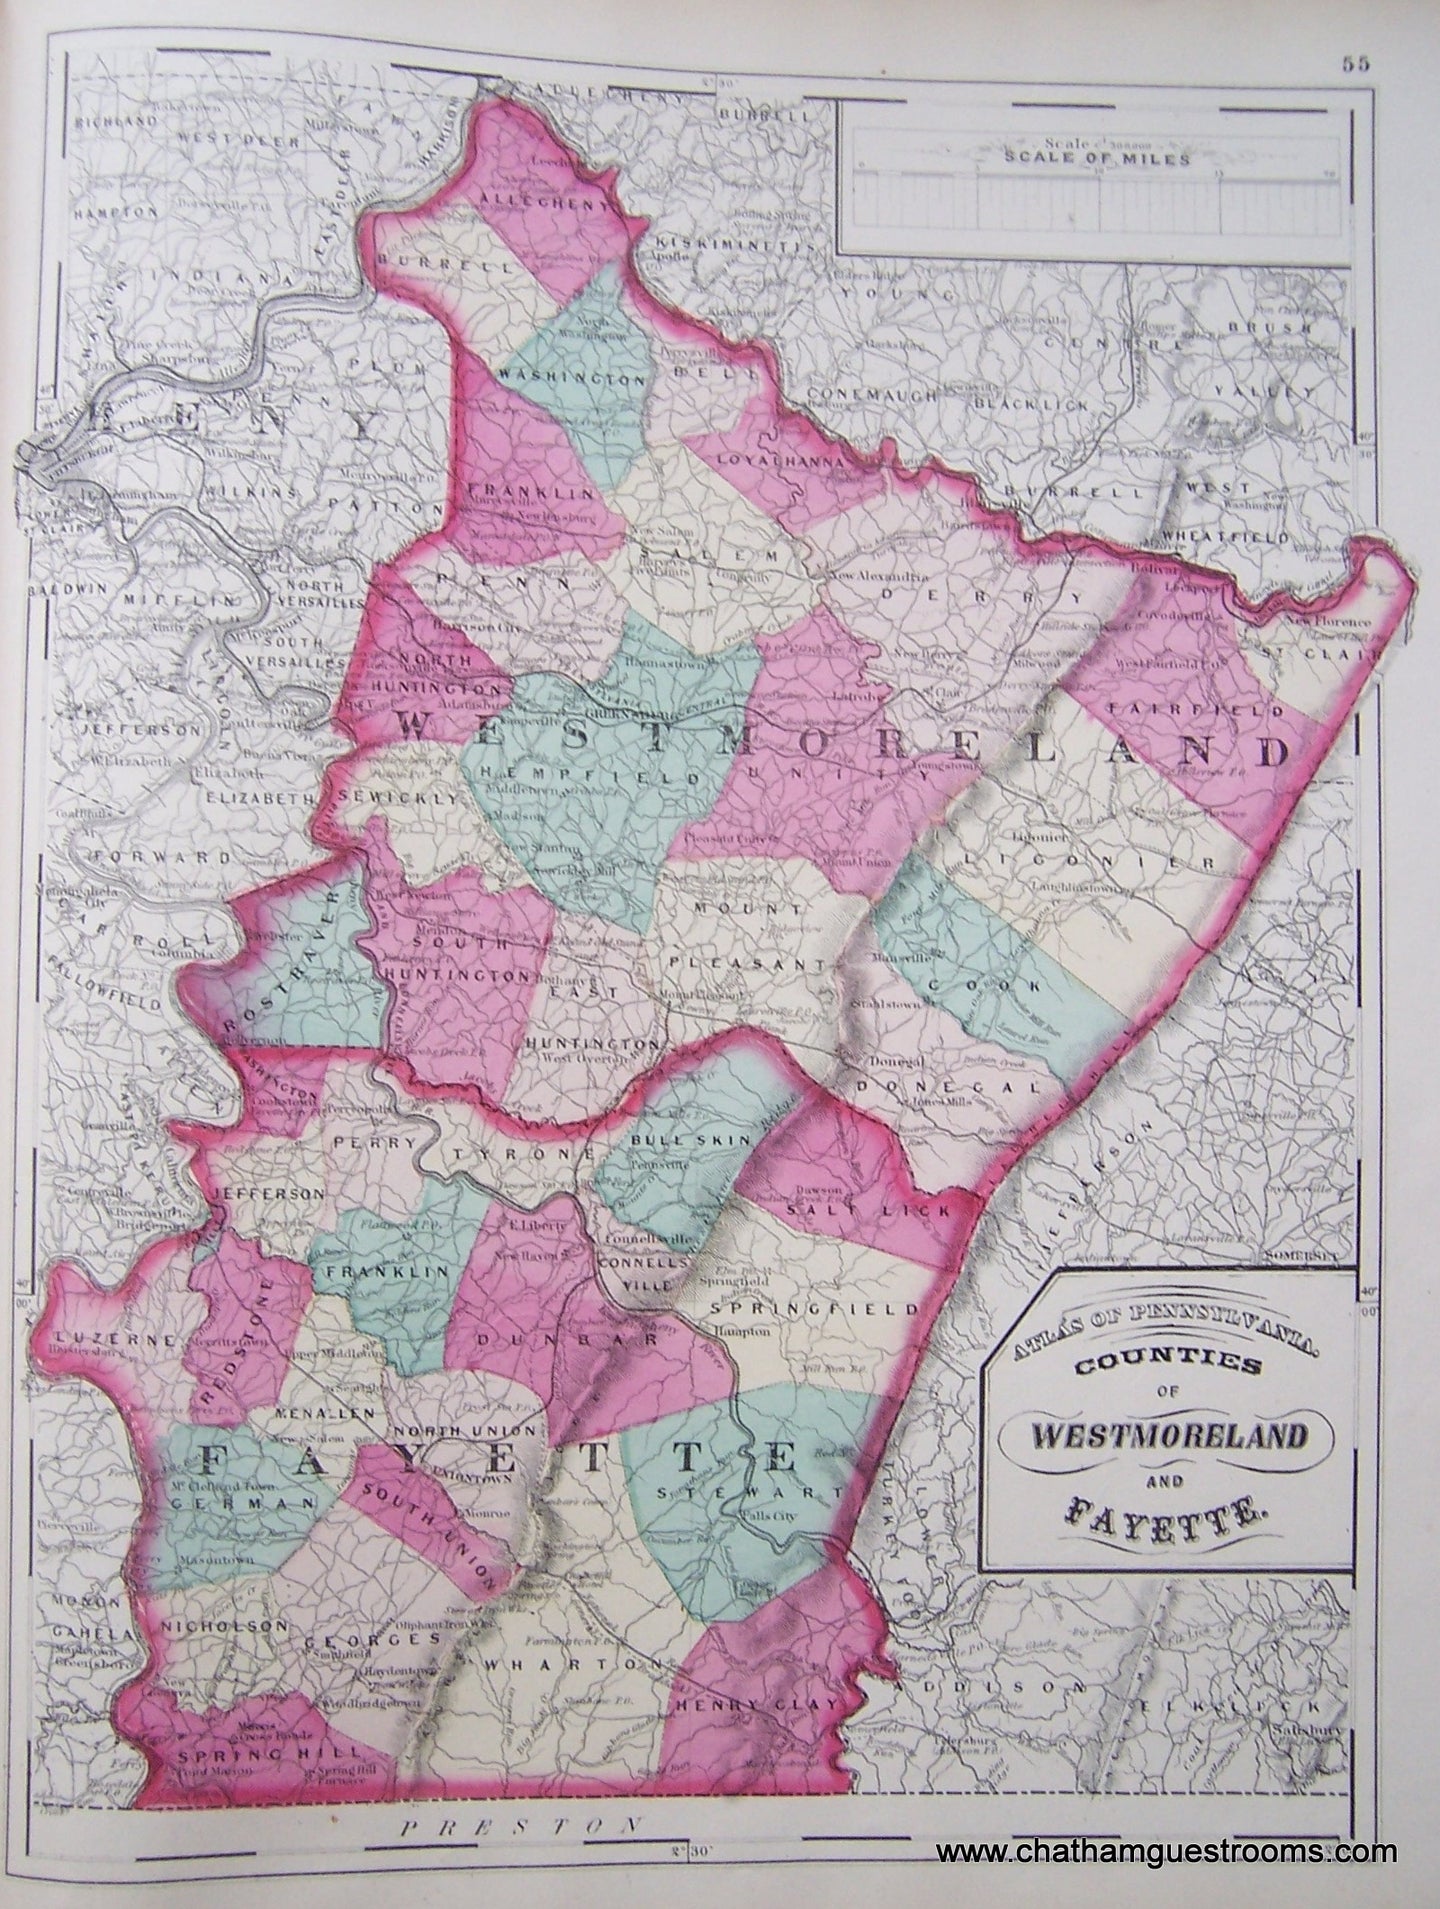 Antique-Map-Counties-Westmoreland-Fayette-Pennsylvania